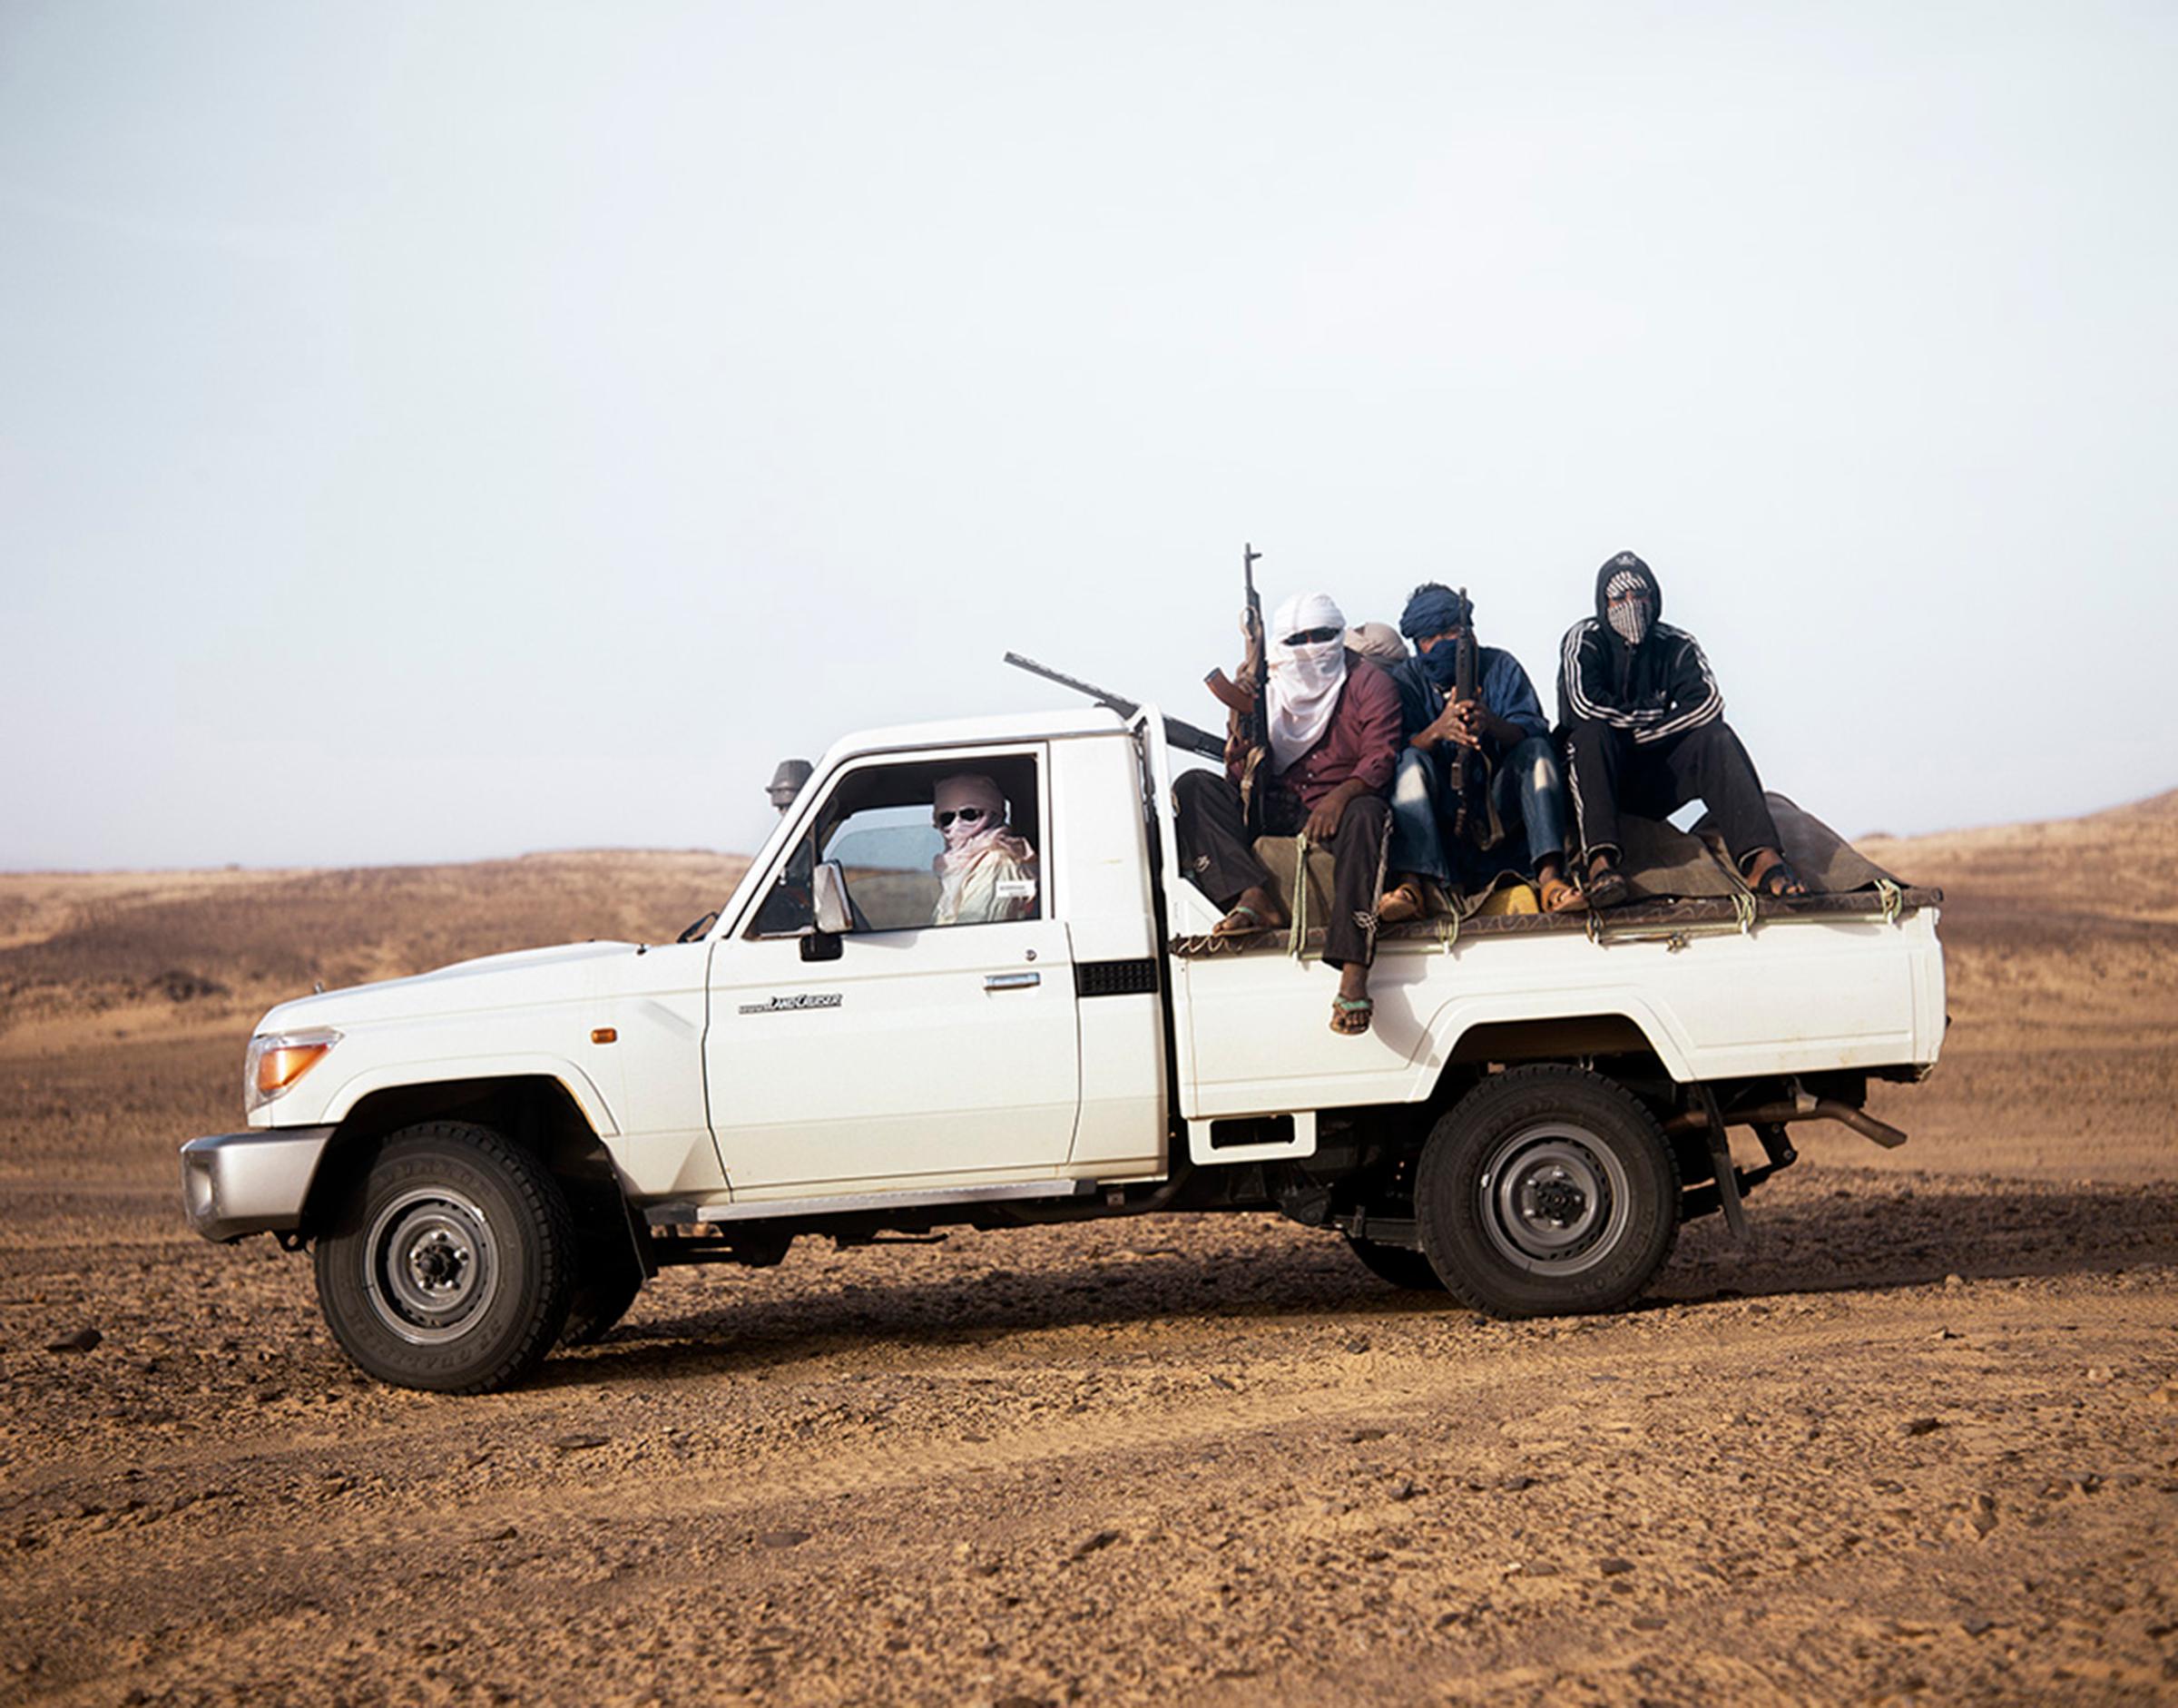 Independent Entrepreneurs - Salvador Pass Area - Northern Niger 2013.The Salvador Pass creates a natural corridor at the border between Niger and Libya, and has been used for centuries by all types of smugglers. More recently, it has been used by jihadis on their way between Northern Mali and Libya.Since mid-2014, French special forces alongside elements of the Niger army regularly build operations in the area to counter jihadi group movement, weapons and drug smuggling.